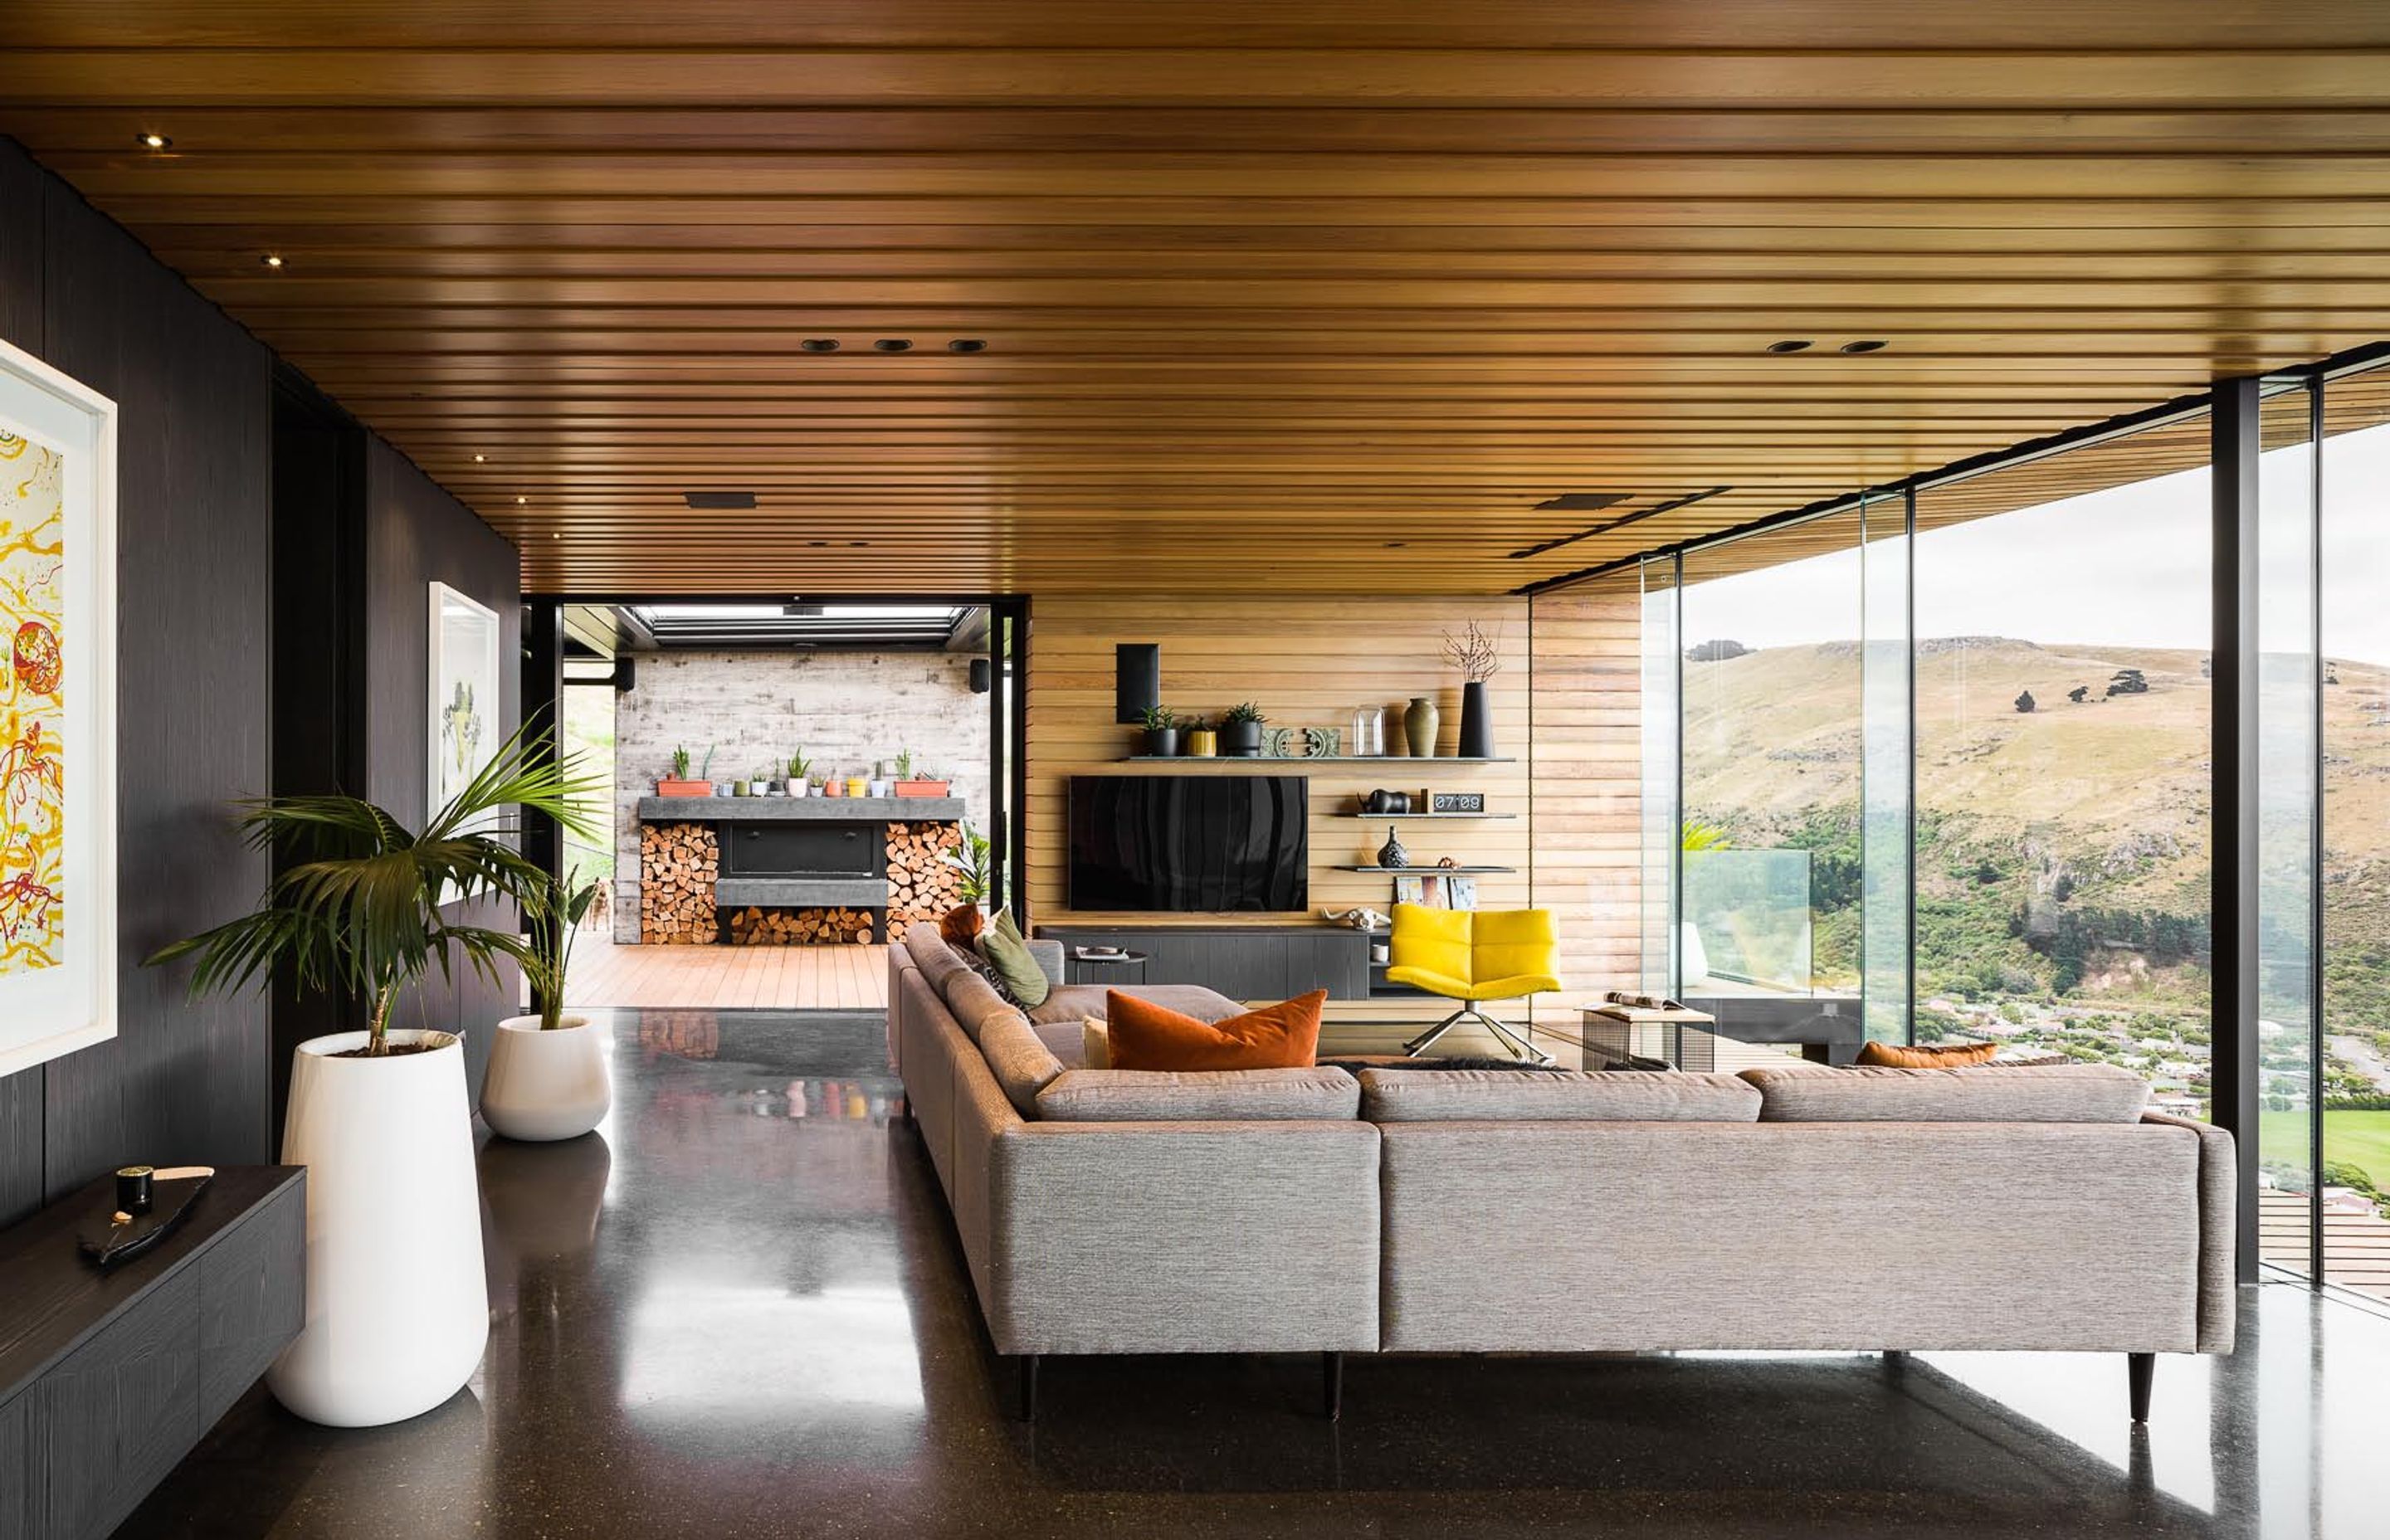 The open plan living area connects to the outdoor entertaining space.